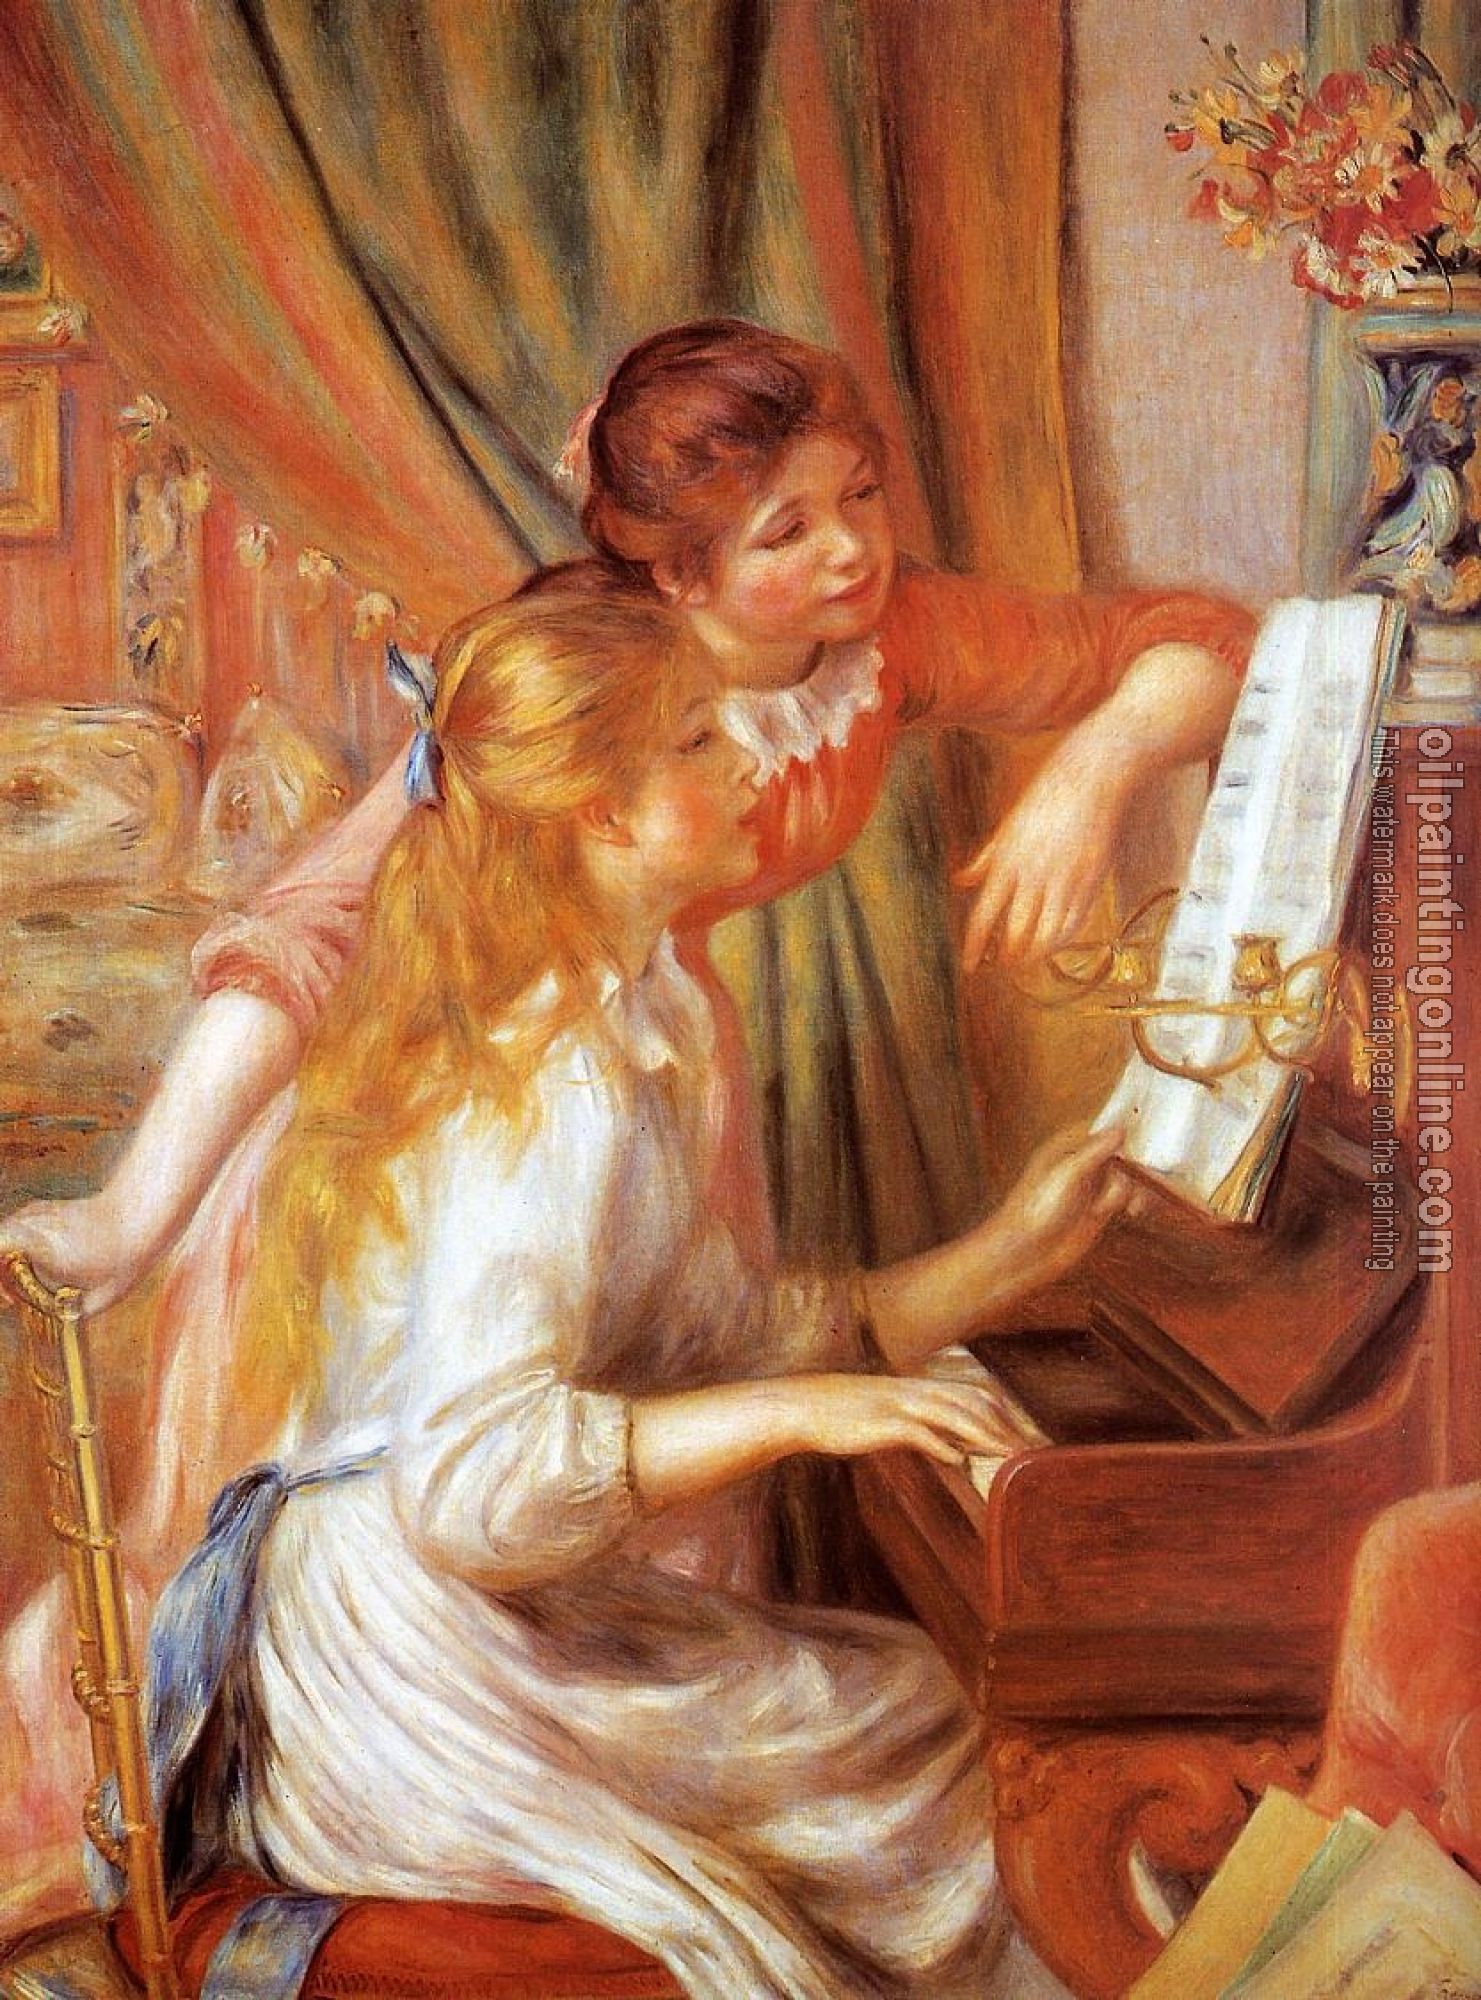 Renoir, Pierre Auguste - Girls at the Piano